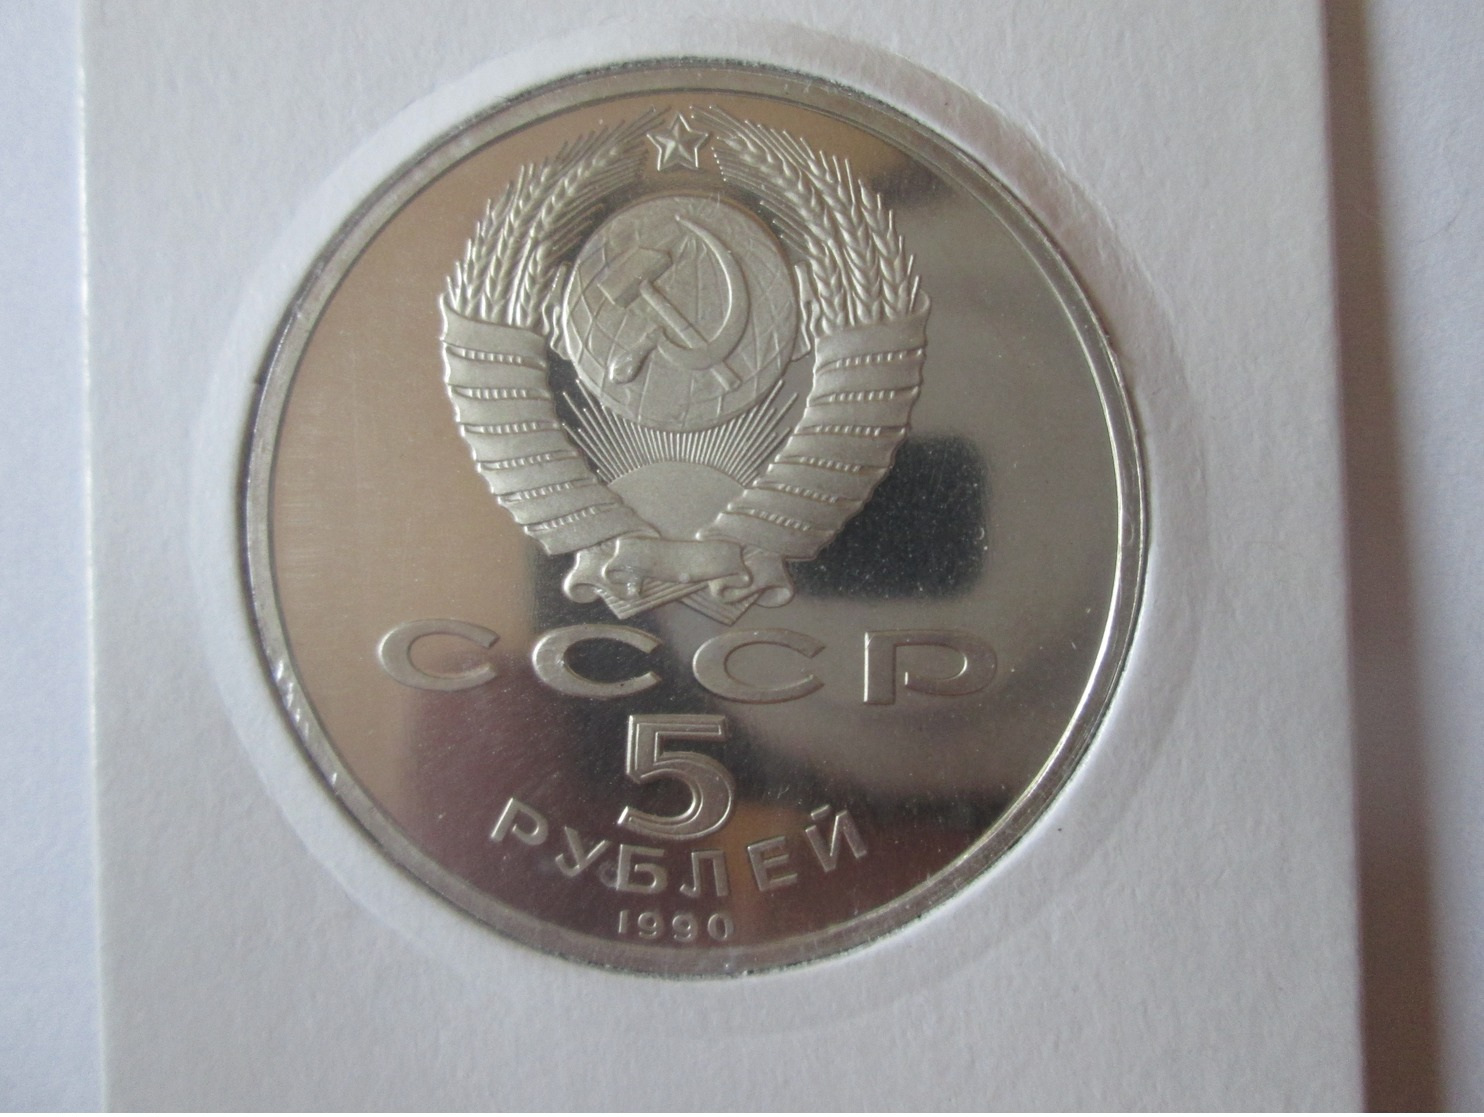 USSR/Russia 5 Rubles 1990 Proof Coin-Erevan/Armenia - Russia